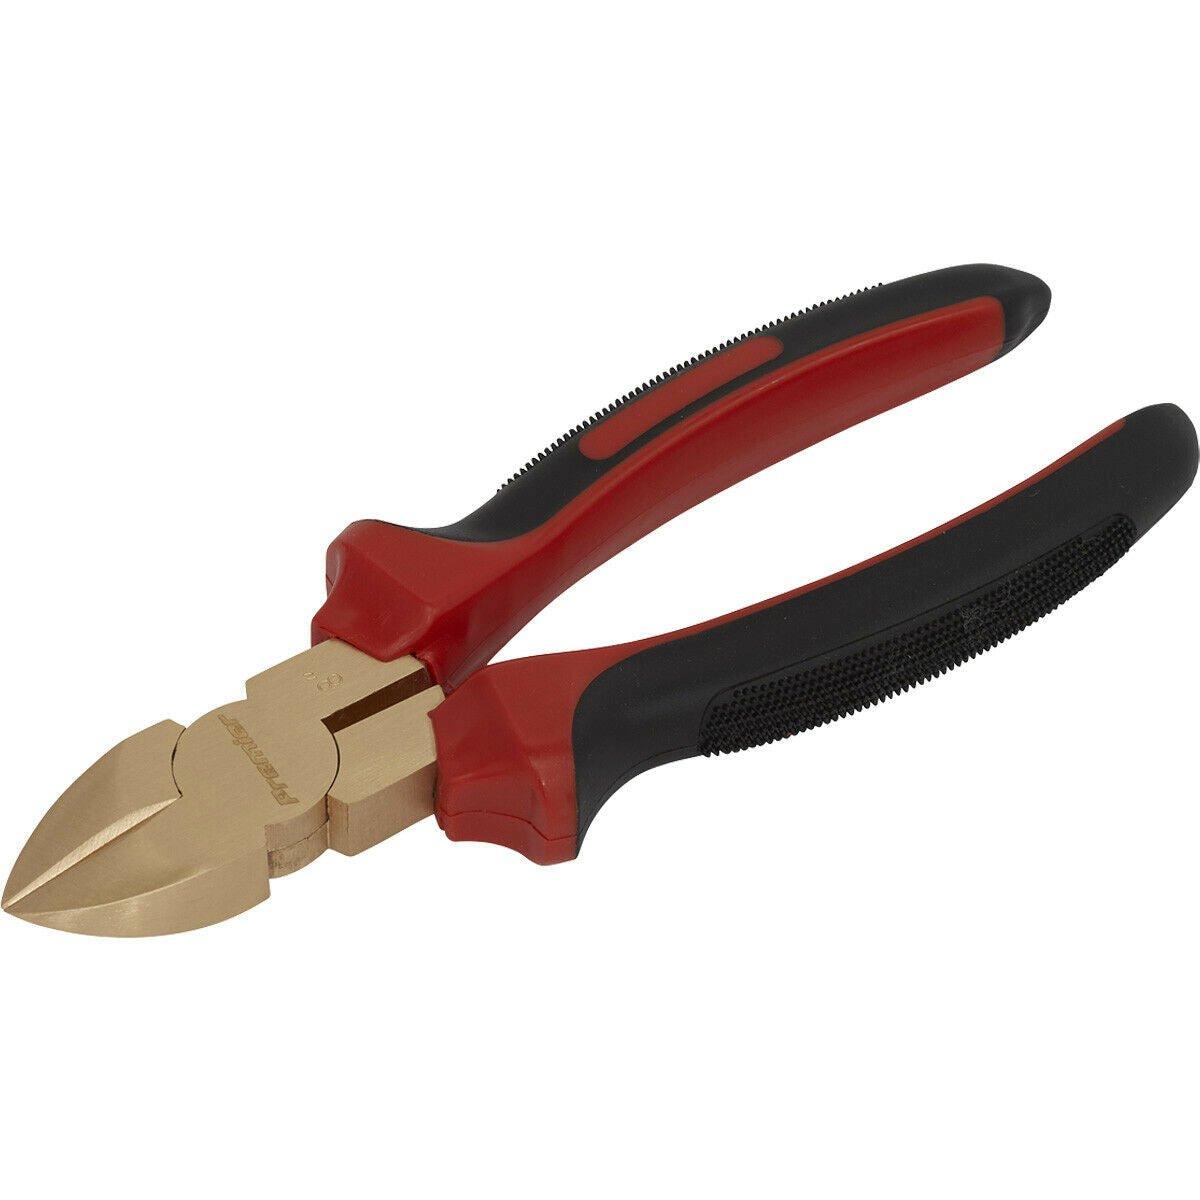 200mm Non-Sparking Diagonal Cutting Pliers - Hardened Cutting Jaws - Die Forged